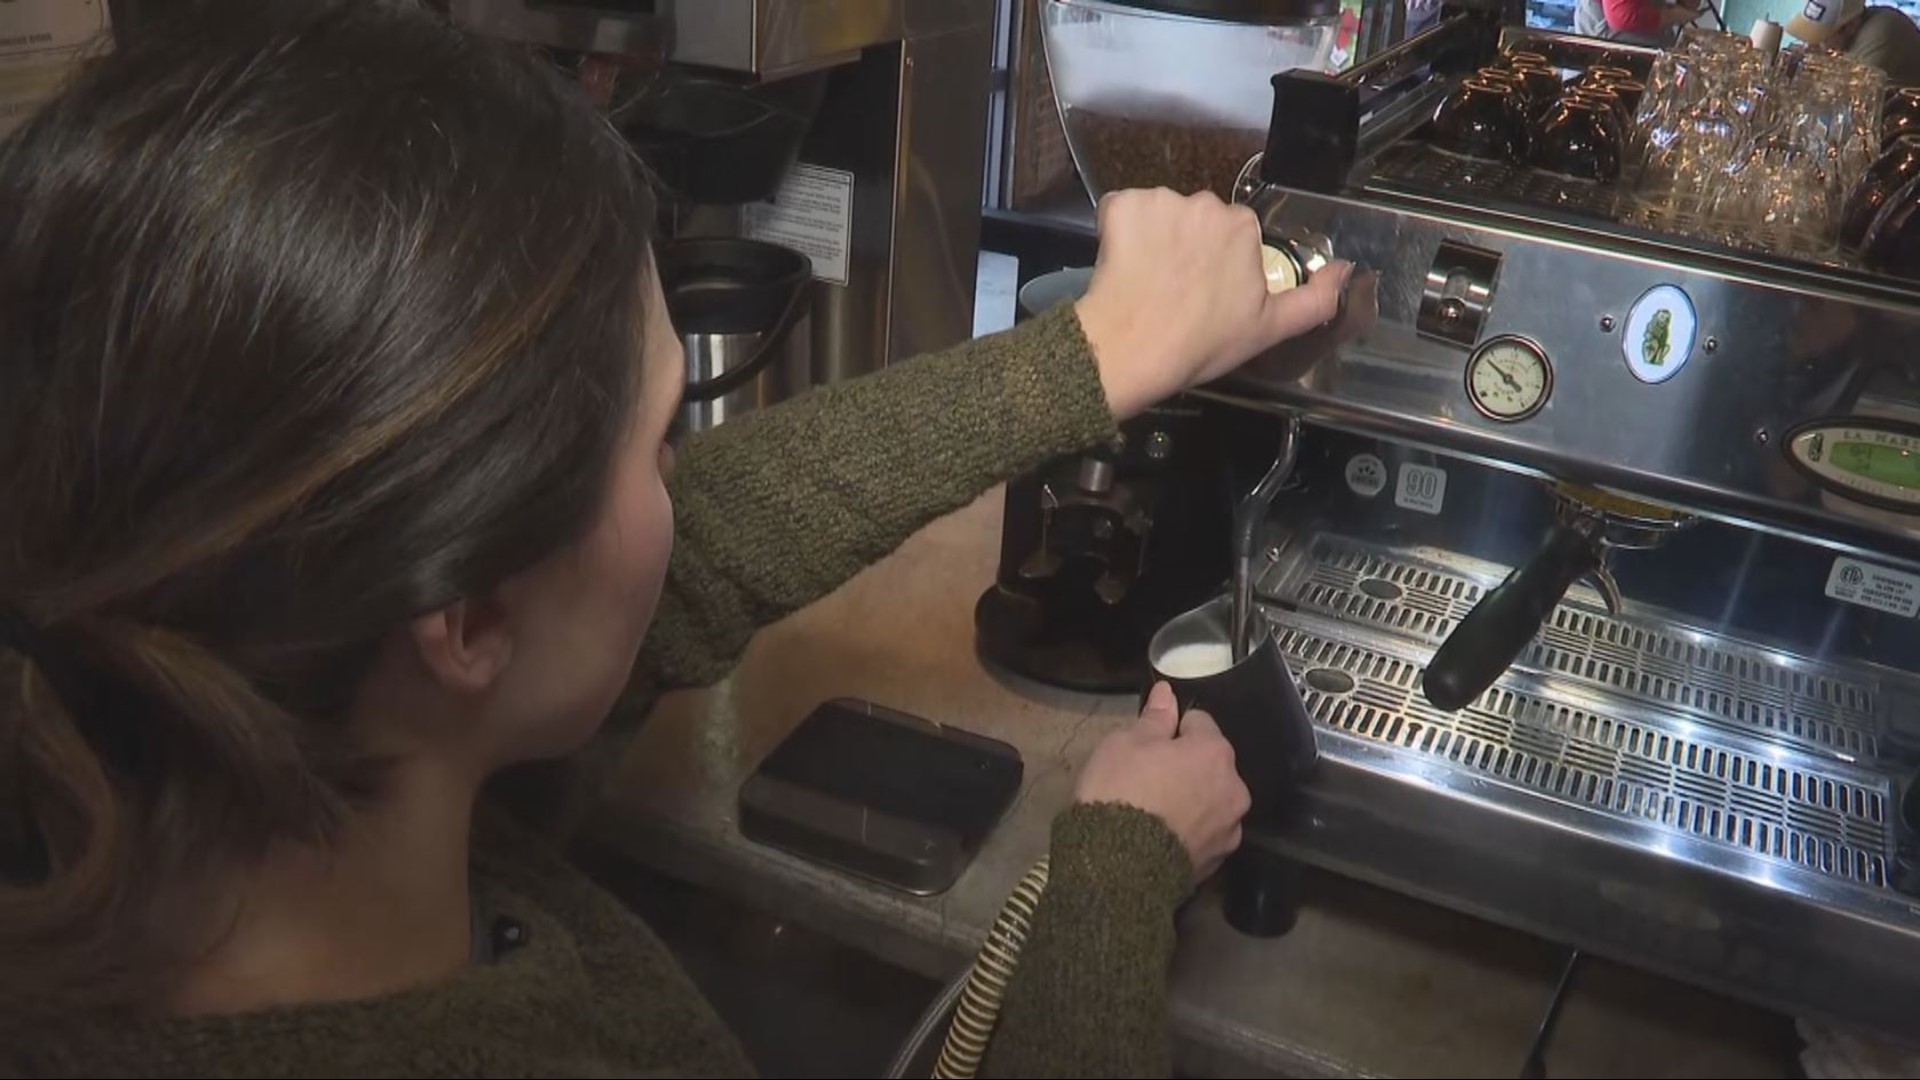 Morning anchor Heidi Alagha tries her hand at making a piping hot latte. If you have a job you want Heidi to attempt, email her at HAlagha@KCENtv.com